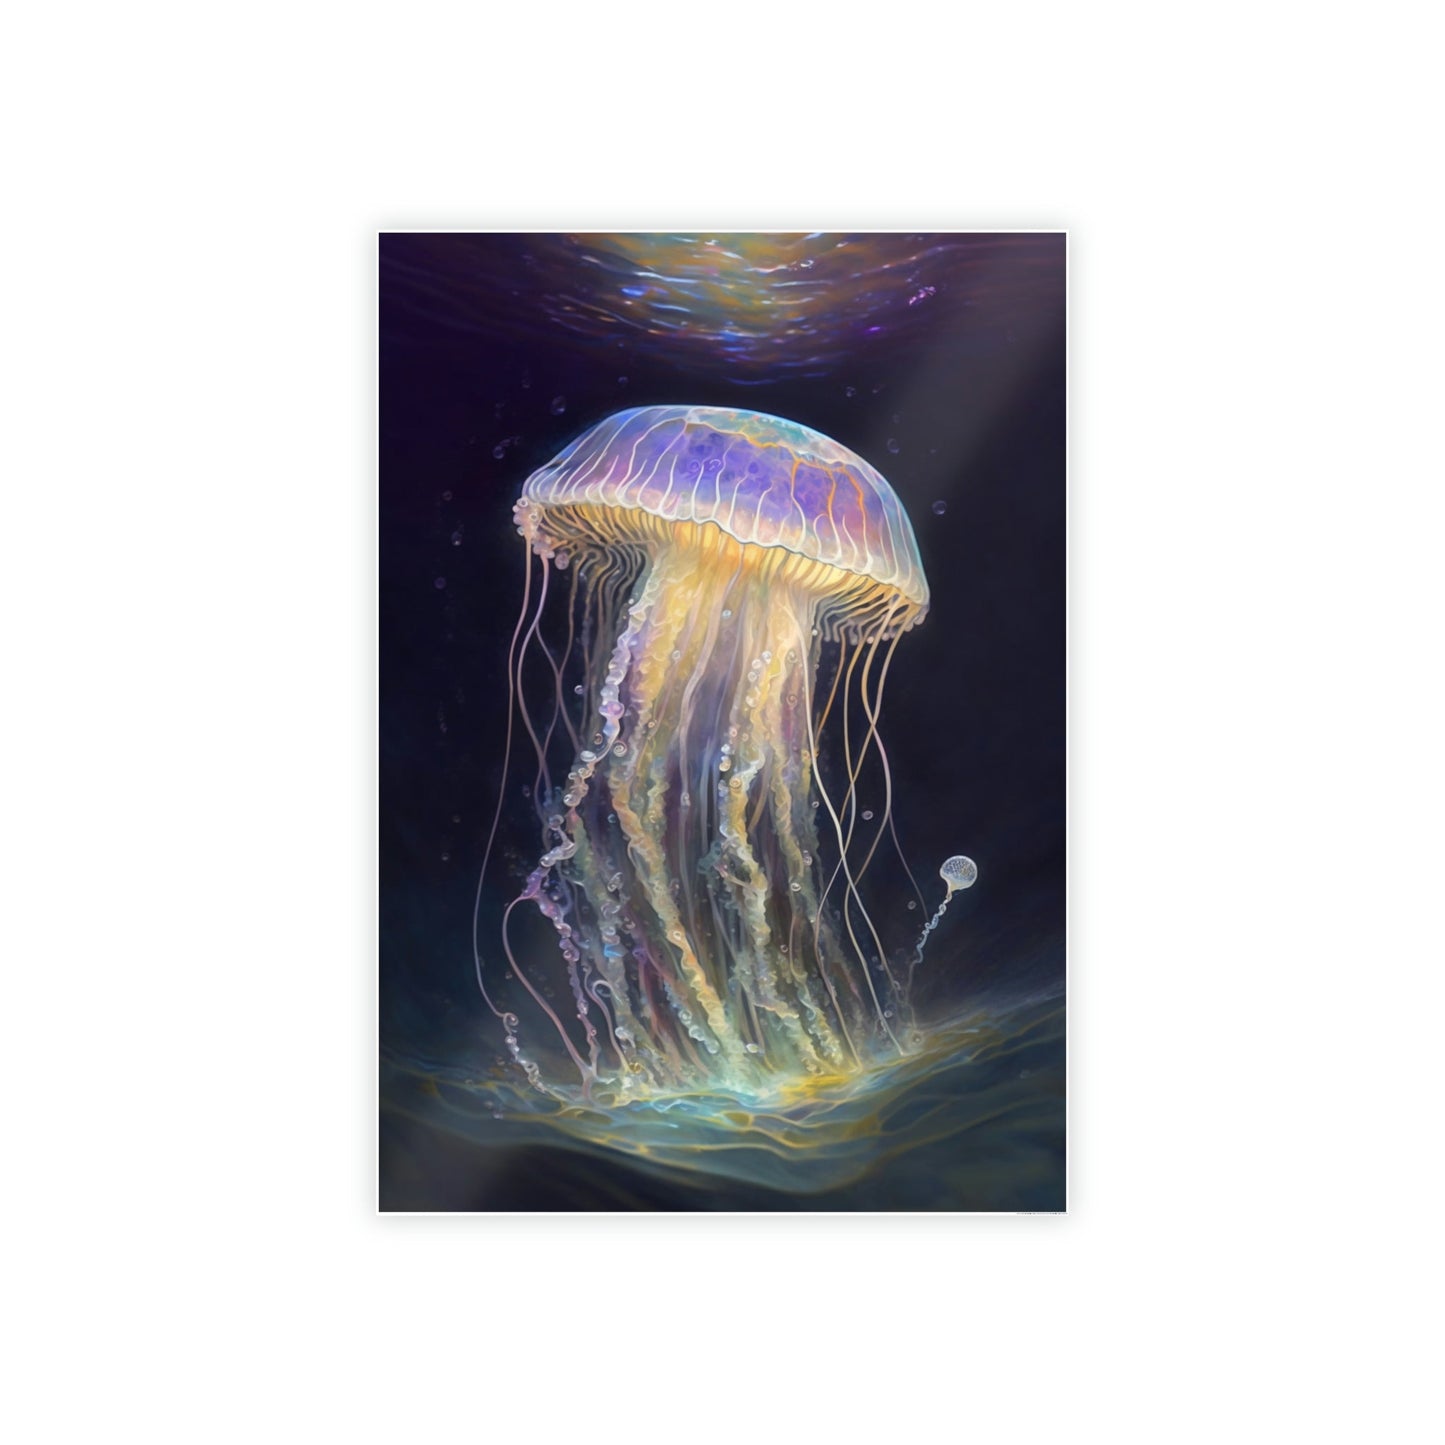 Mesmerizing Ocean Life: Artistic Print on Canvas Featuring Jellyfishes